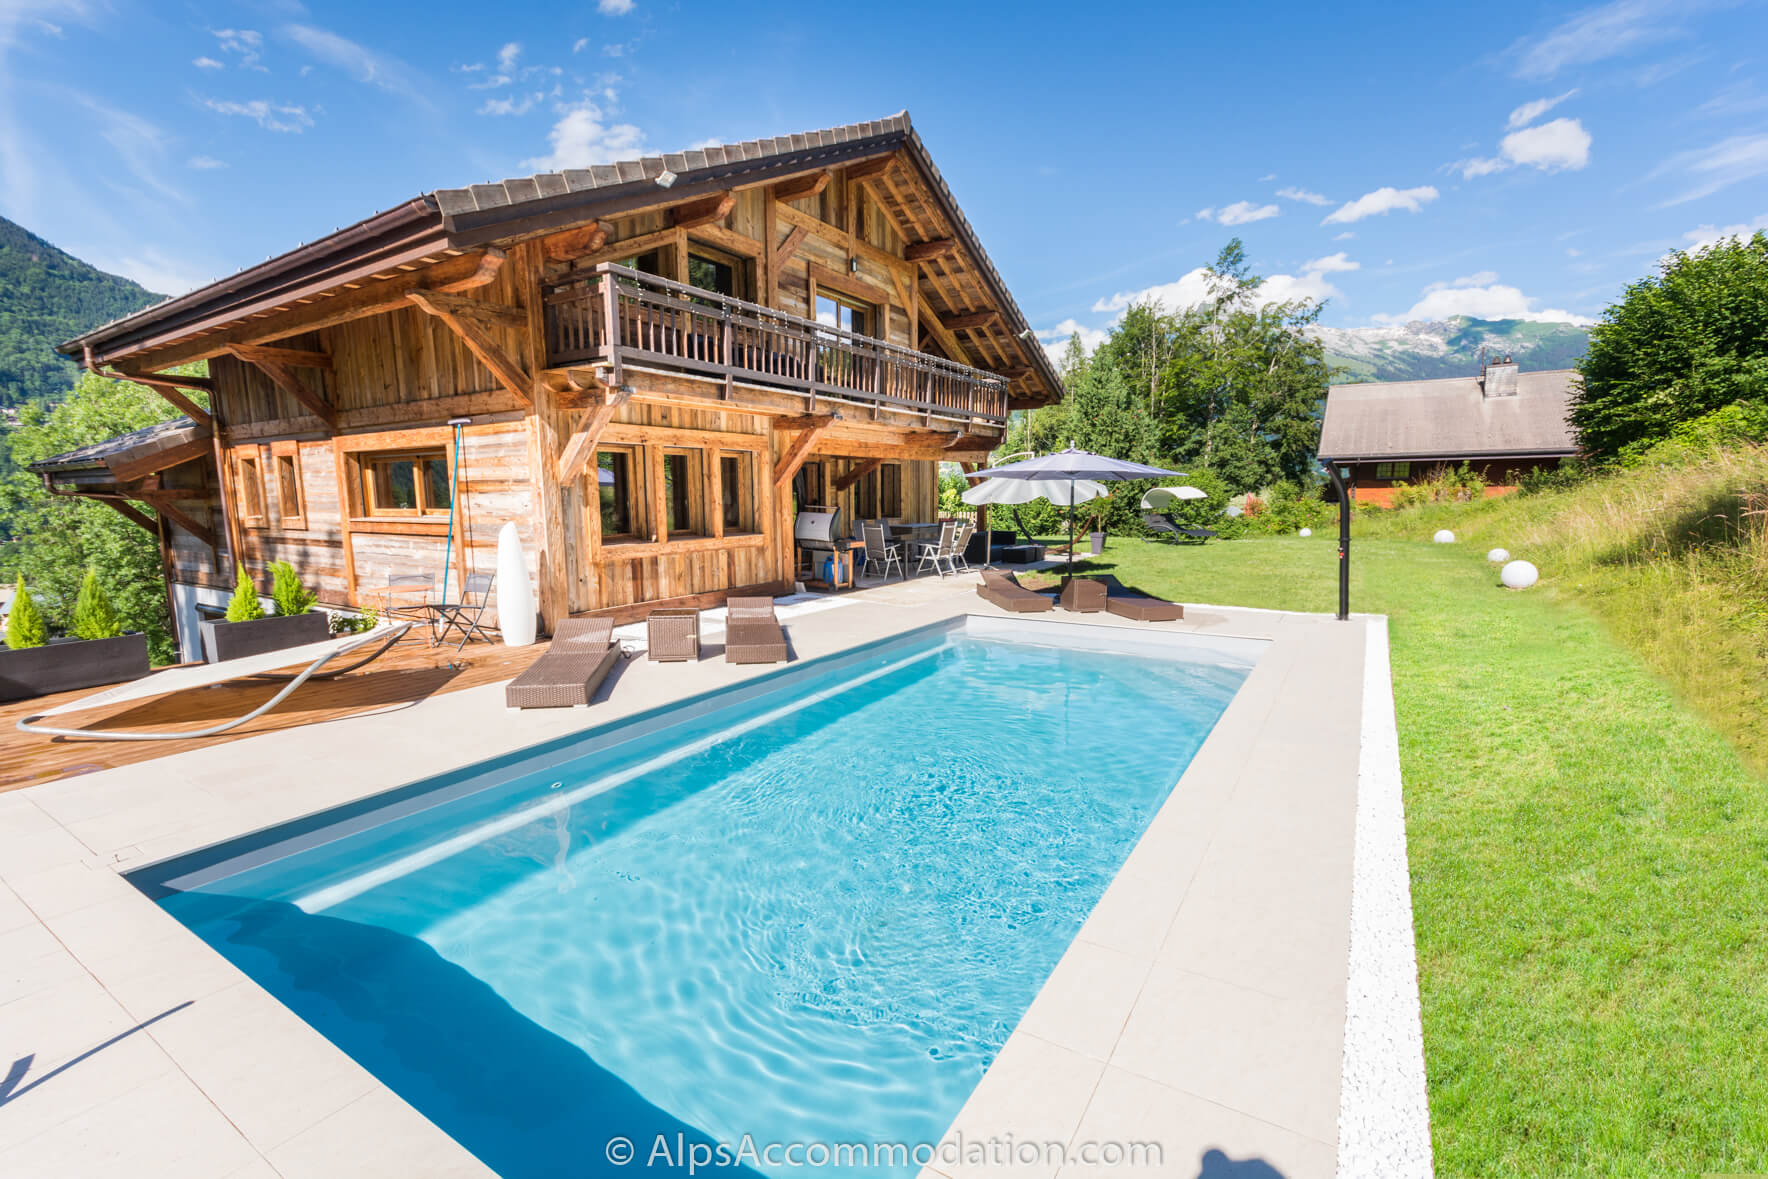 Chalet Sole Mio Morillon - The stunning private gardens with pool are ideal in summer